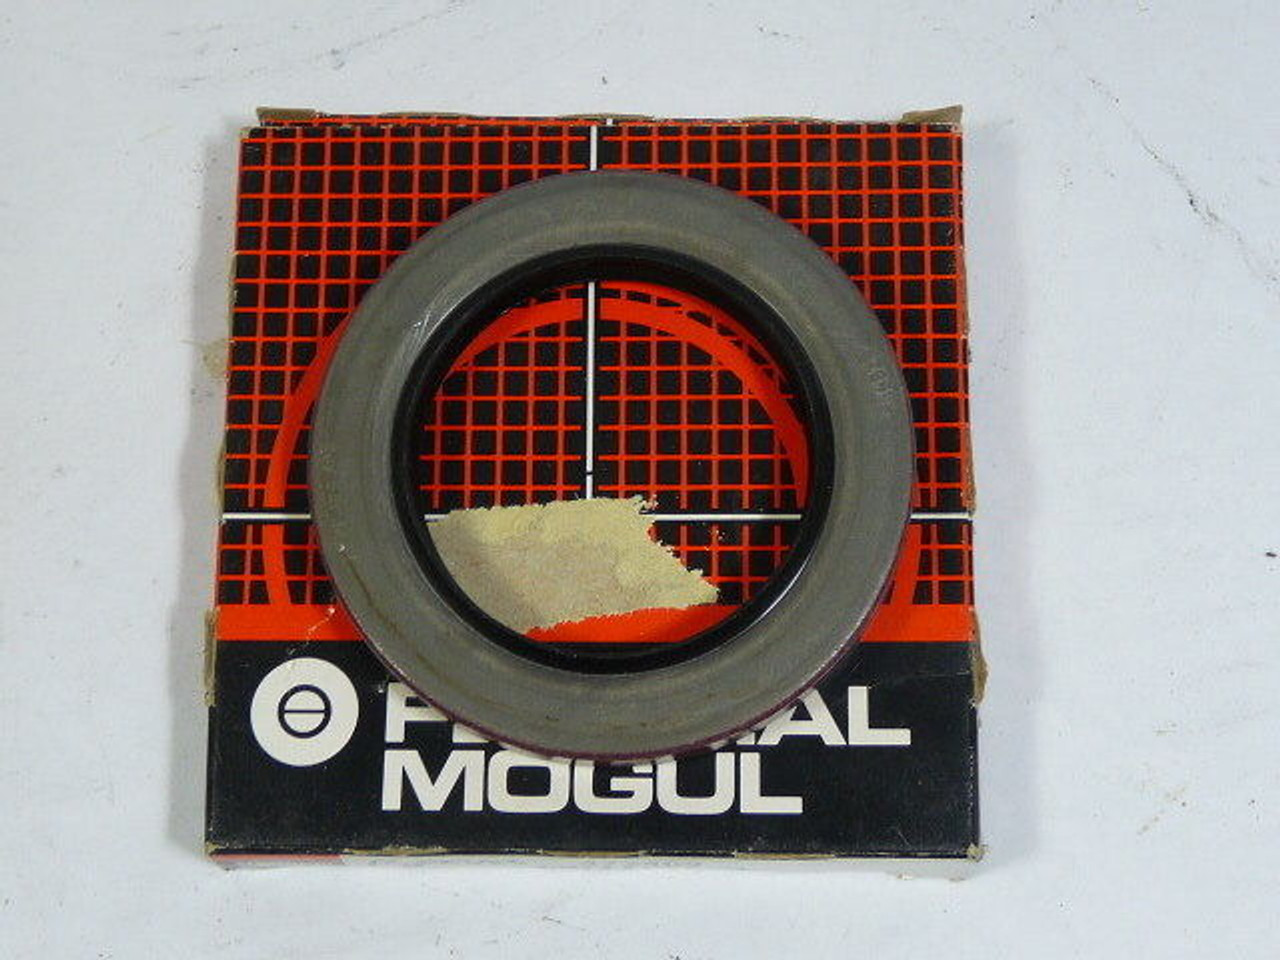 National Seal 472409 Oil Seal 2-1/8x3.189x3/8in ! NEW !